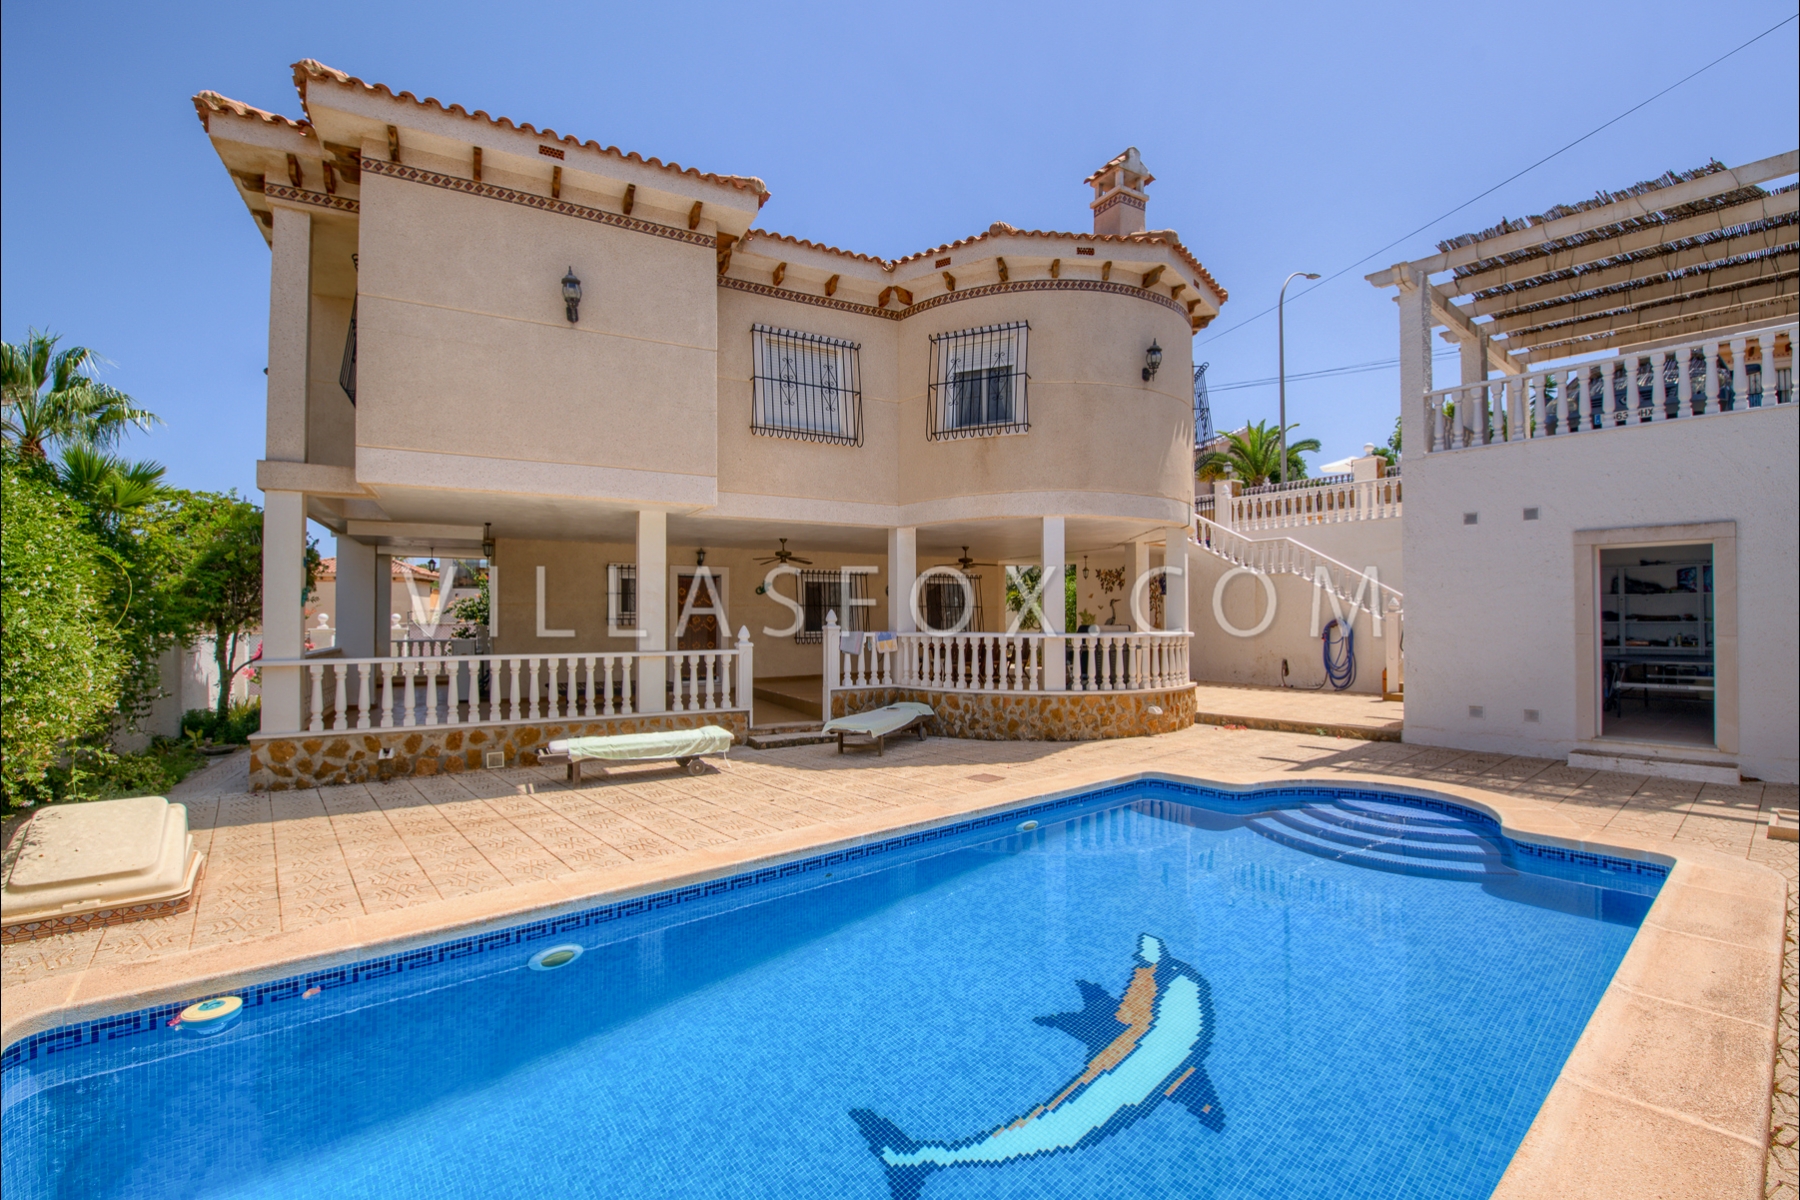 Villas María luxury villa with guest apartment, games room and private pool!